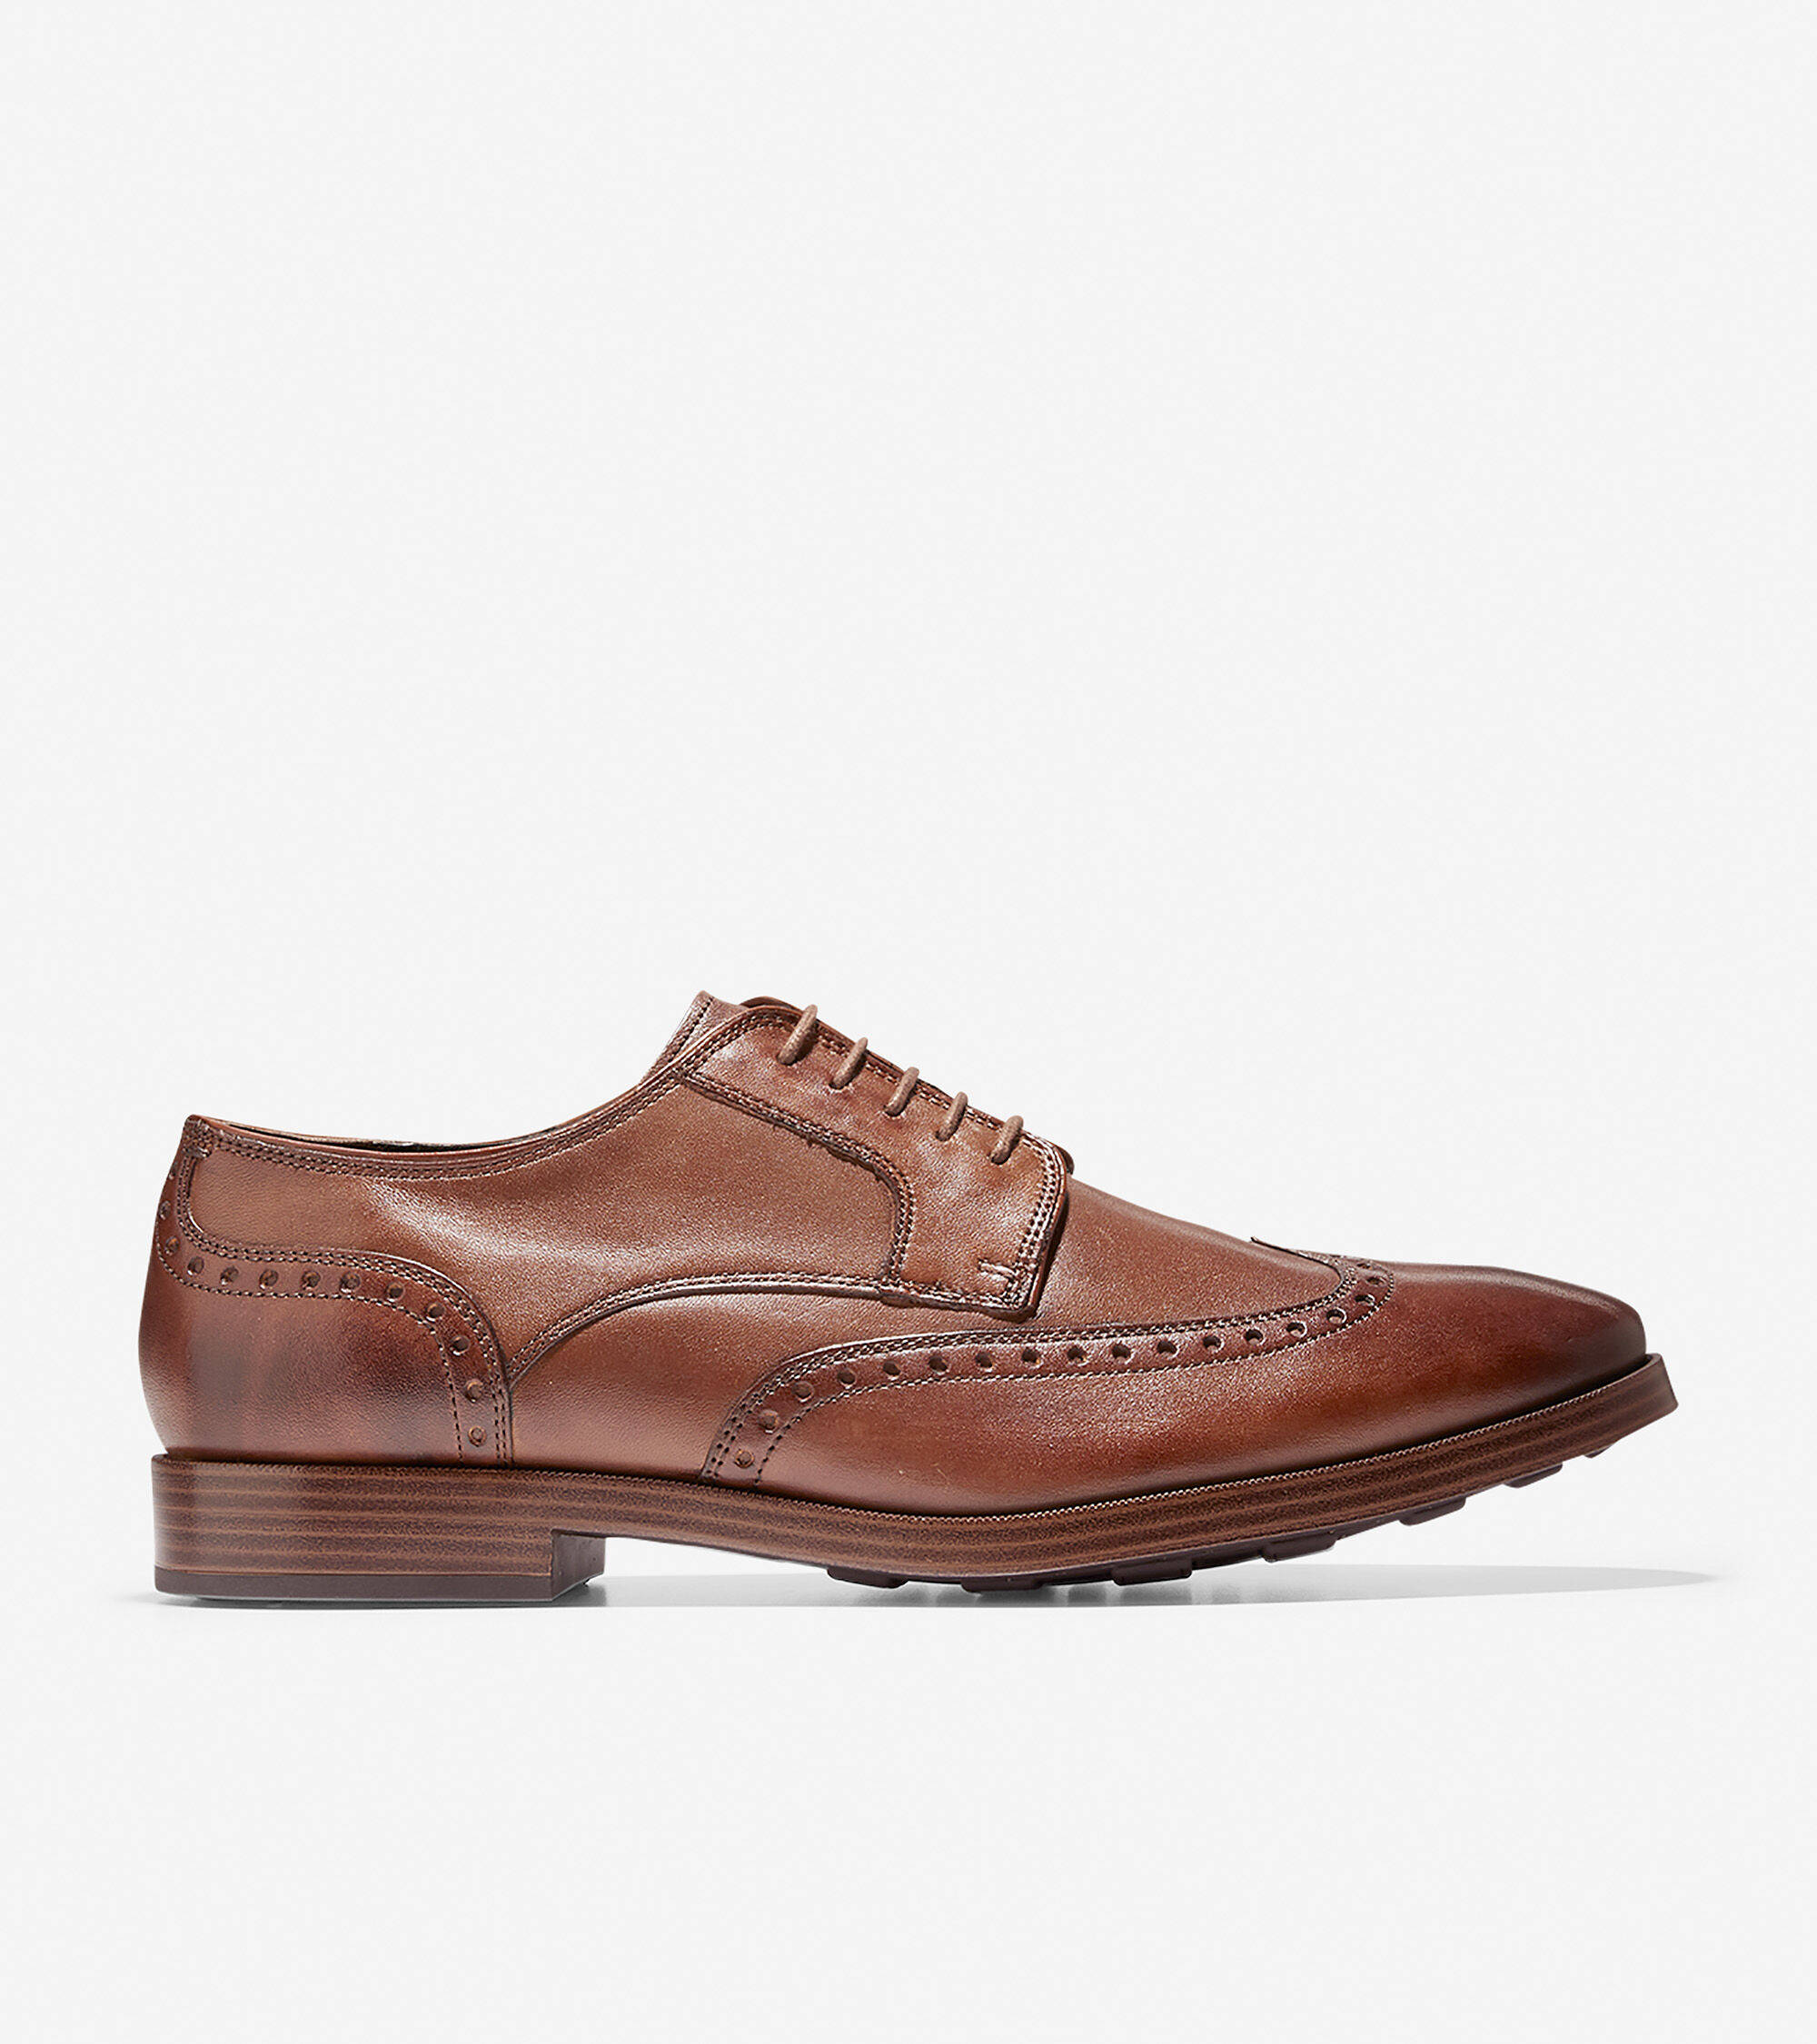 cole haan men's jay grand wing oxford